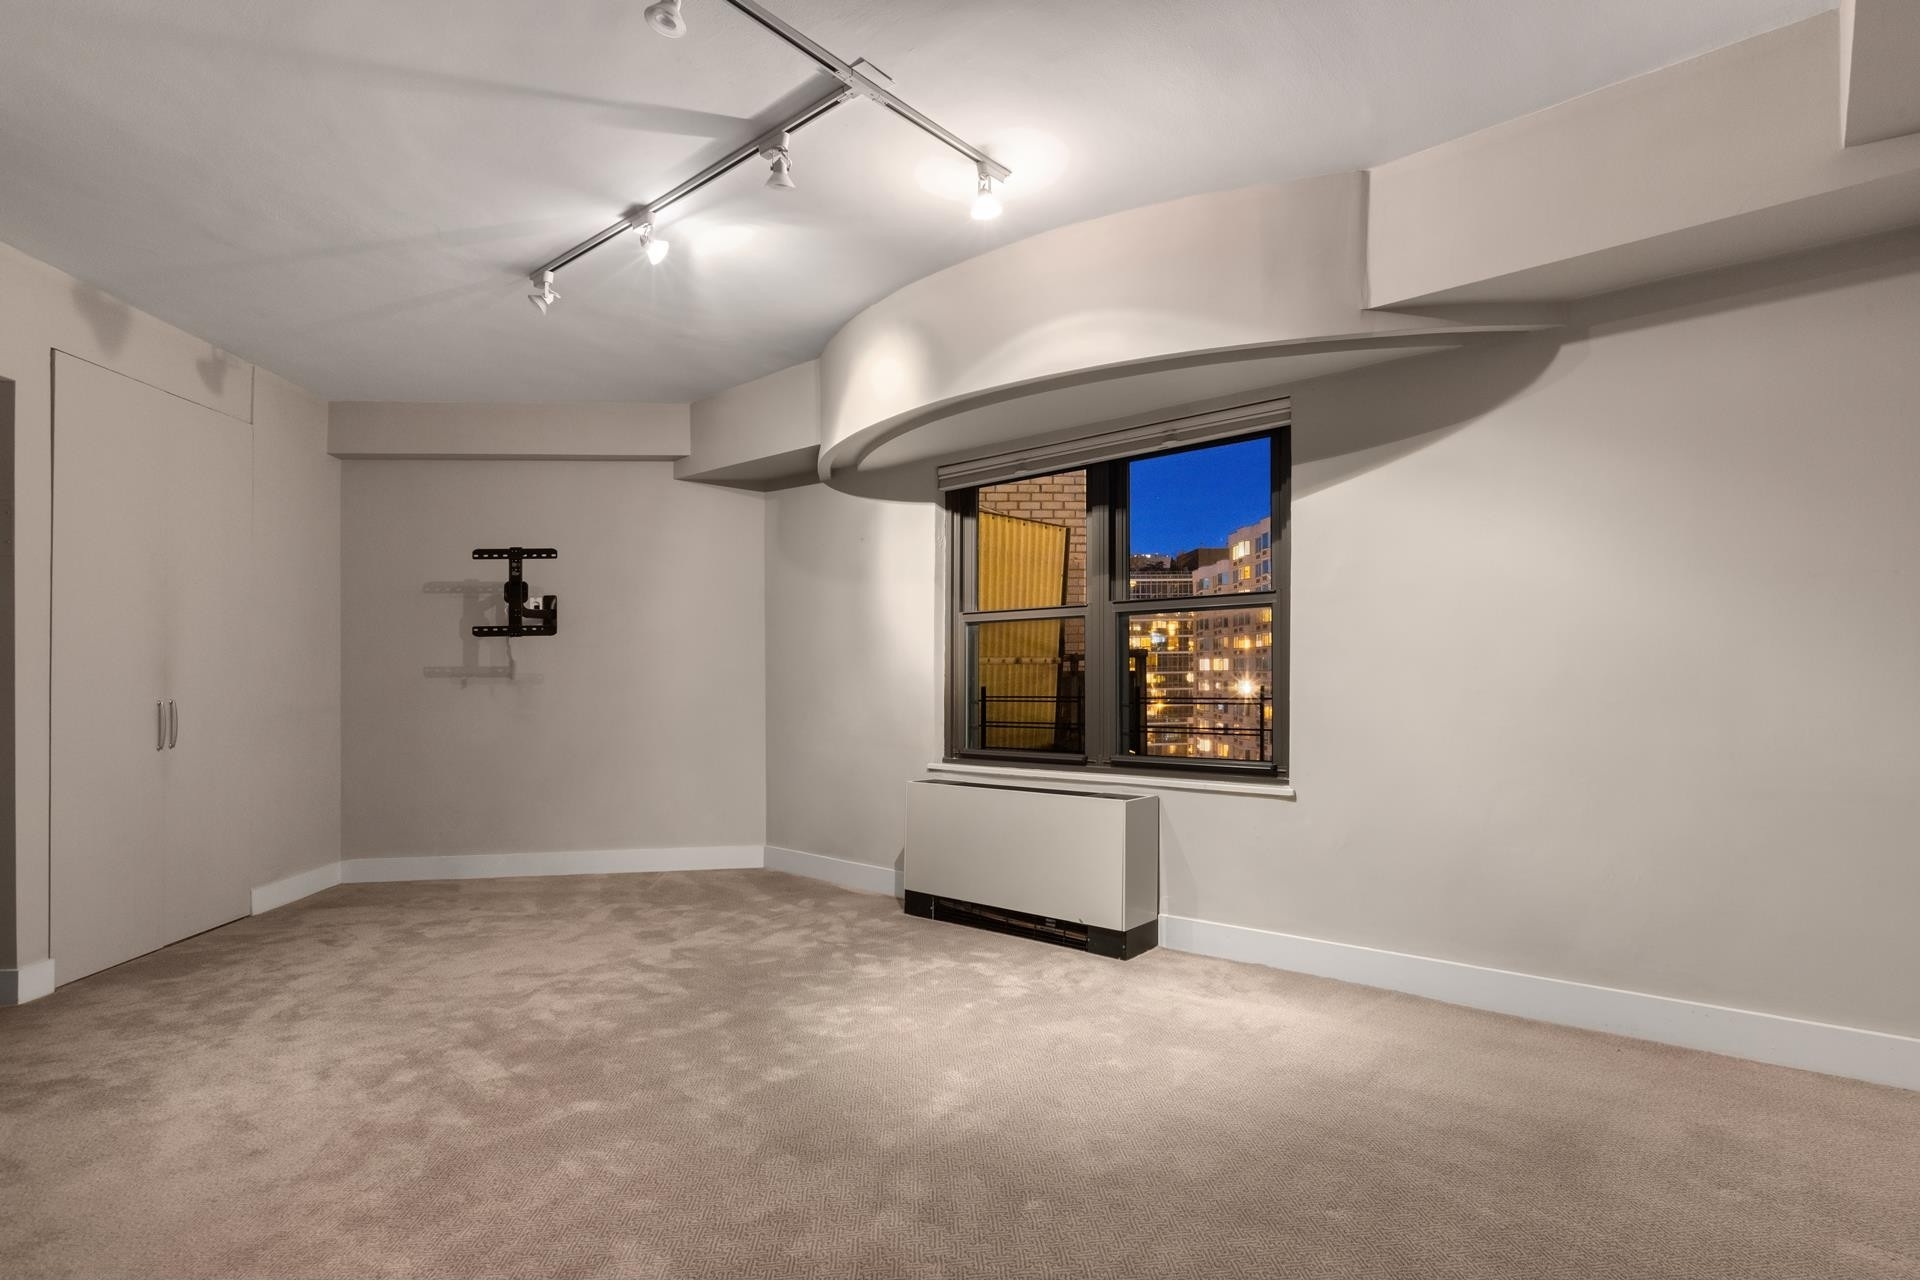 15. Co-op Properties for Sale at 345 E 69TH ST, PHC Lenox Hill, New York, New York 10021